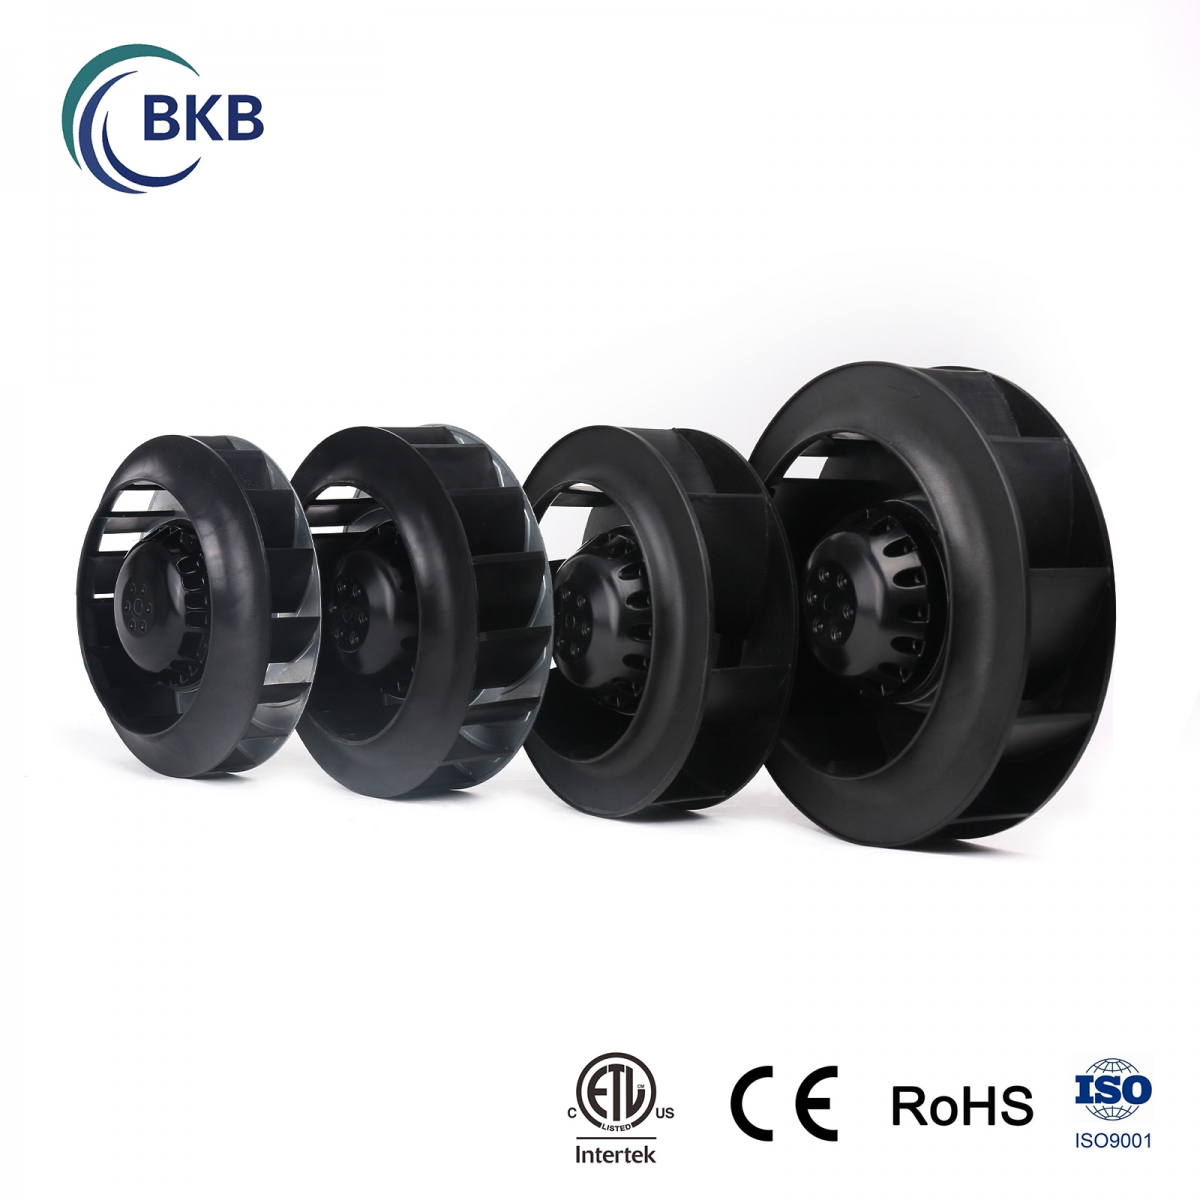 HOME ELECTRONIC EQUIPMENT EXHAUST ELECTRIC AIR BLOWER CIRCULAR FAN MANUFACTURER FACTORY IN CHINA .-SUNLIGHT BLOWER,Centrifugal Fans, Inline Fans,Motors,Backward curved centrifugal fans ,Forward curved centrifugal fans ,inlet fans, EC fans